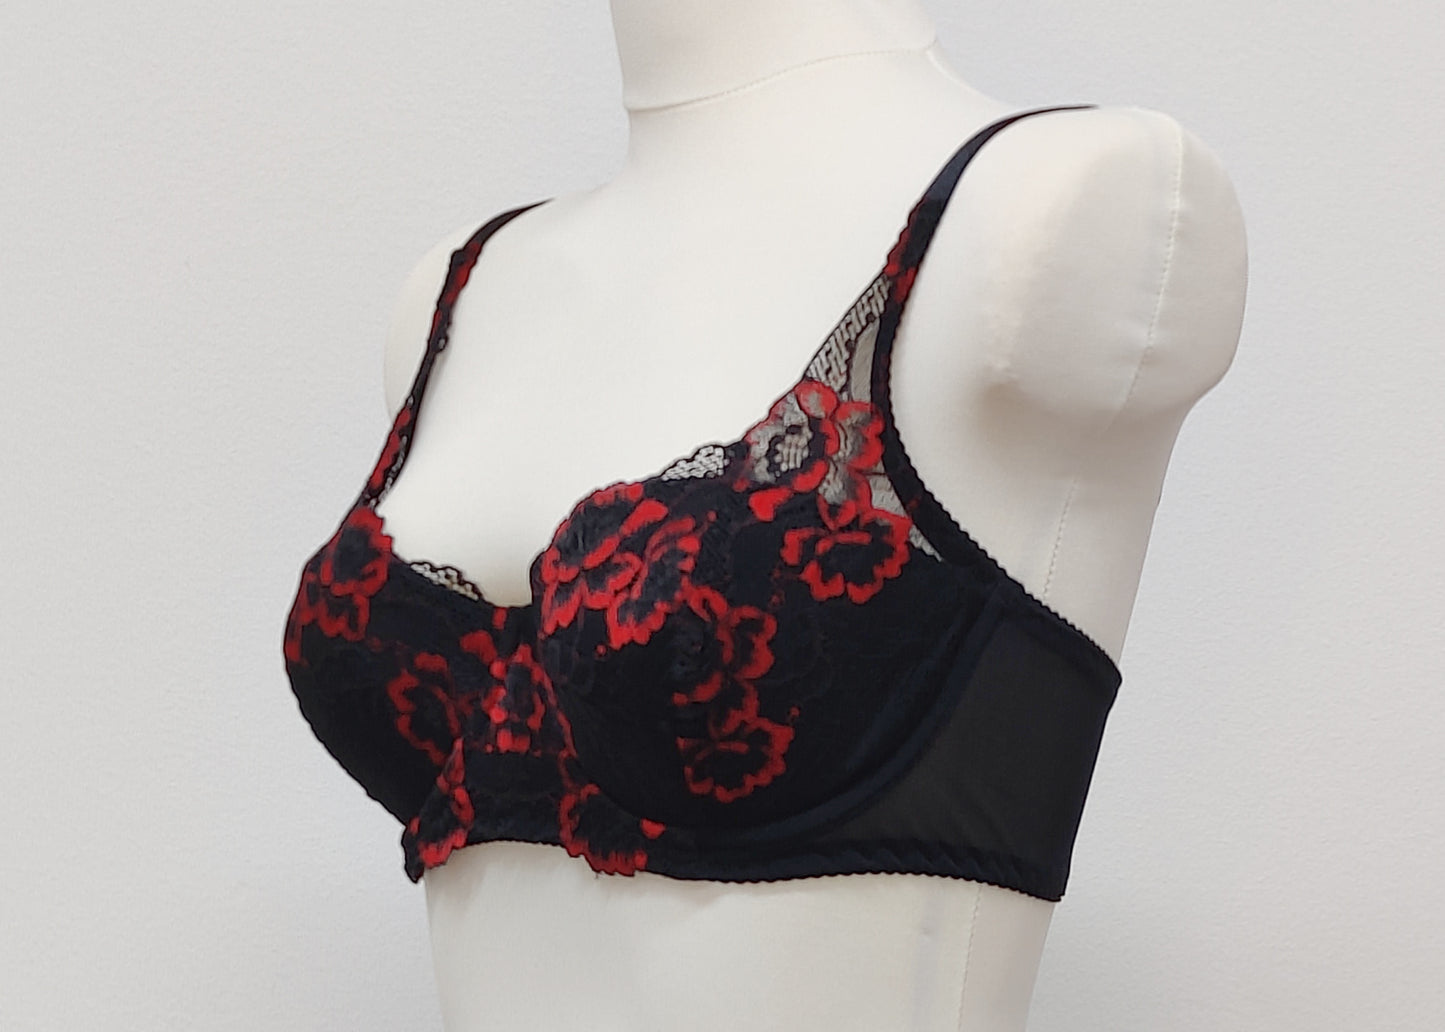 Black and Red Lace ALICE Bra